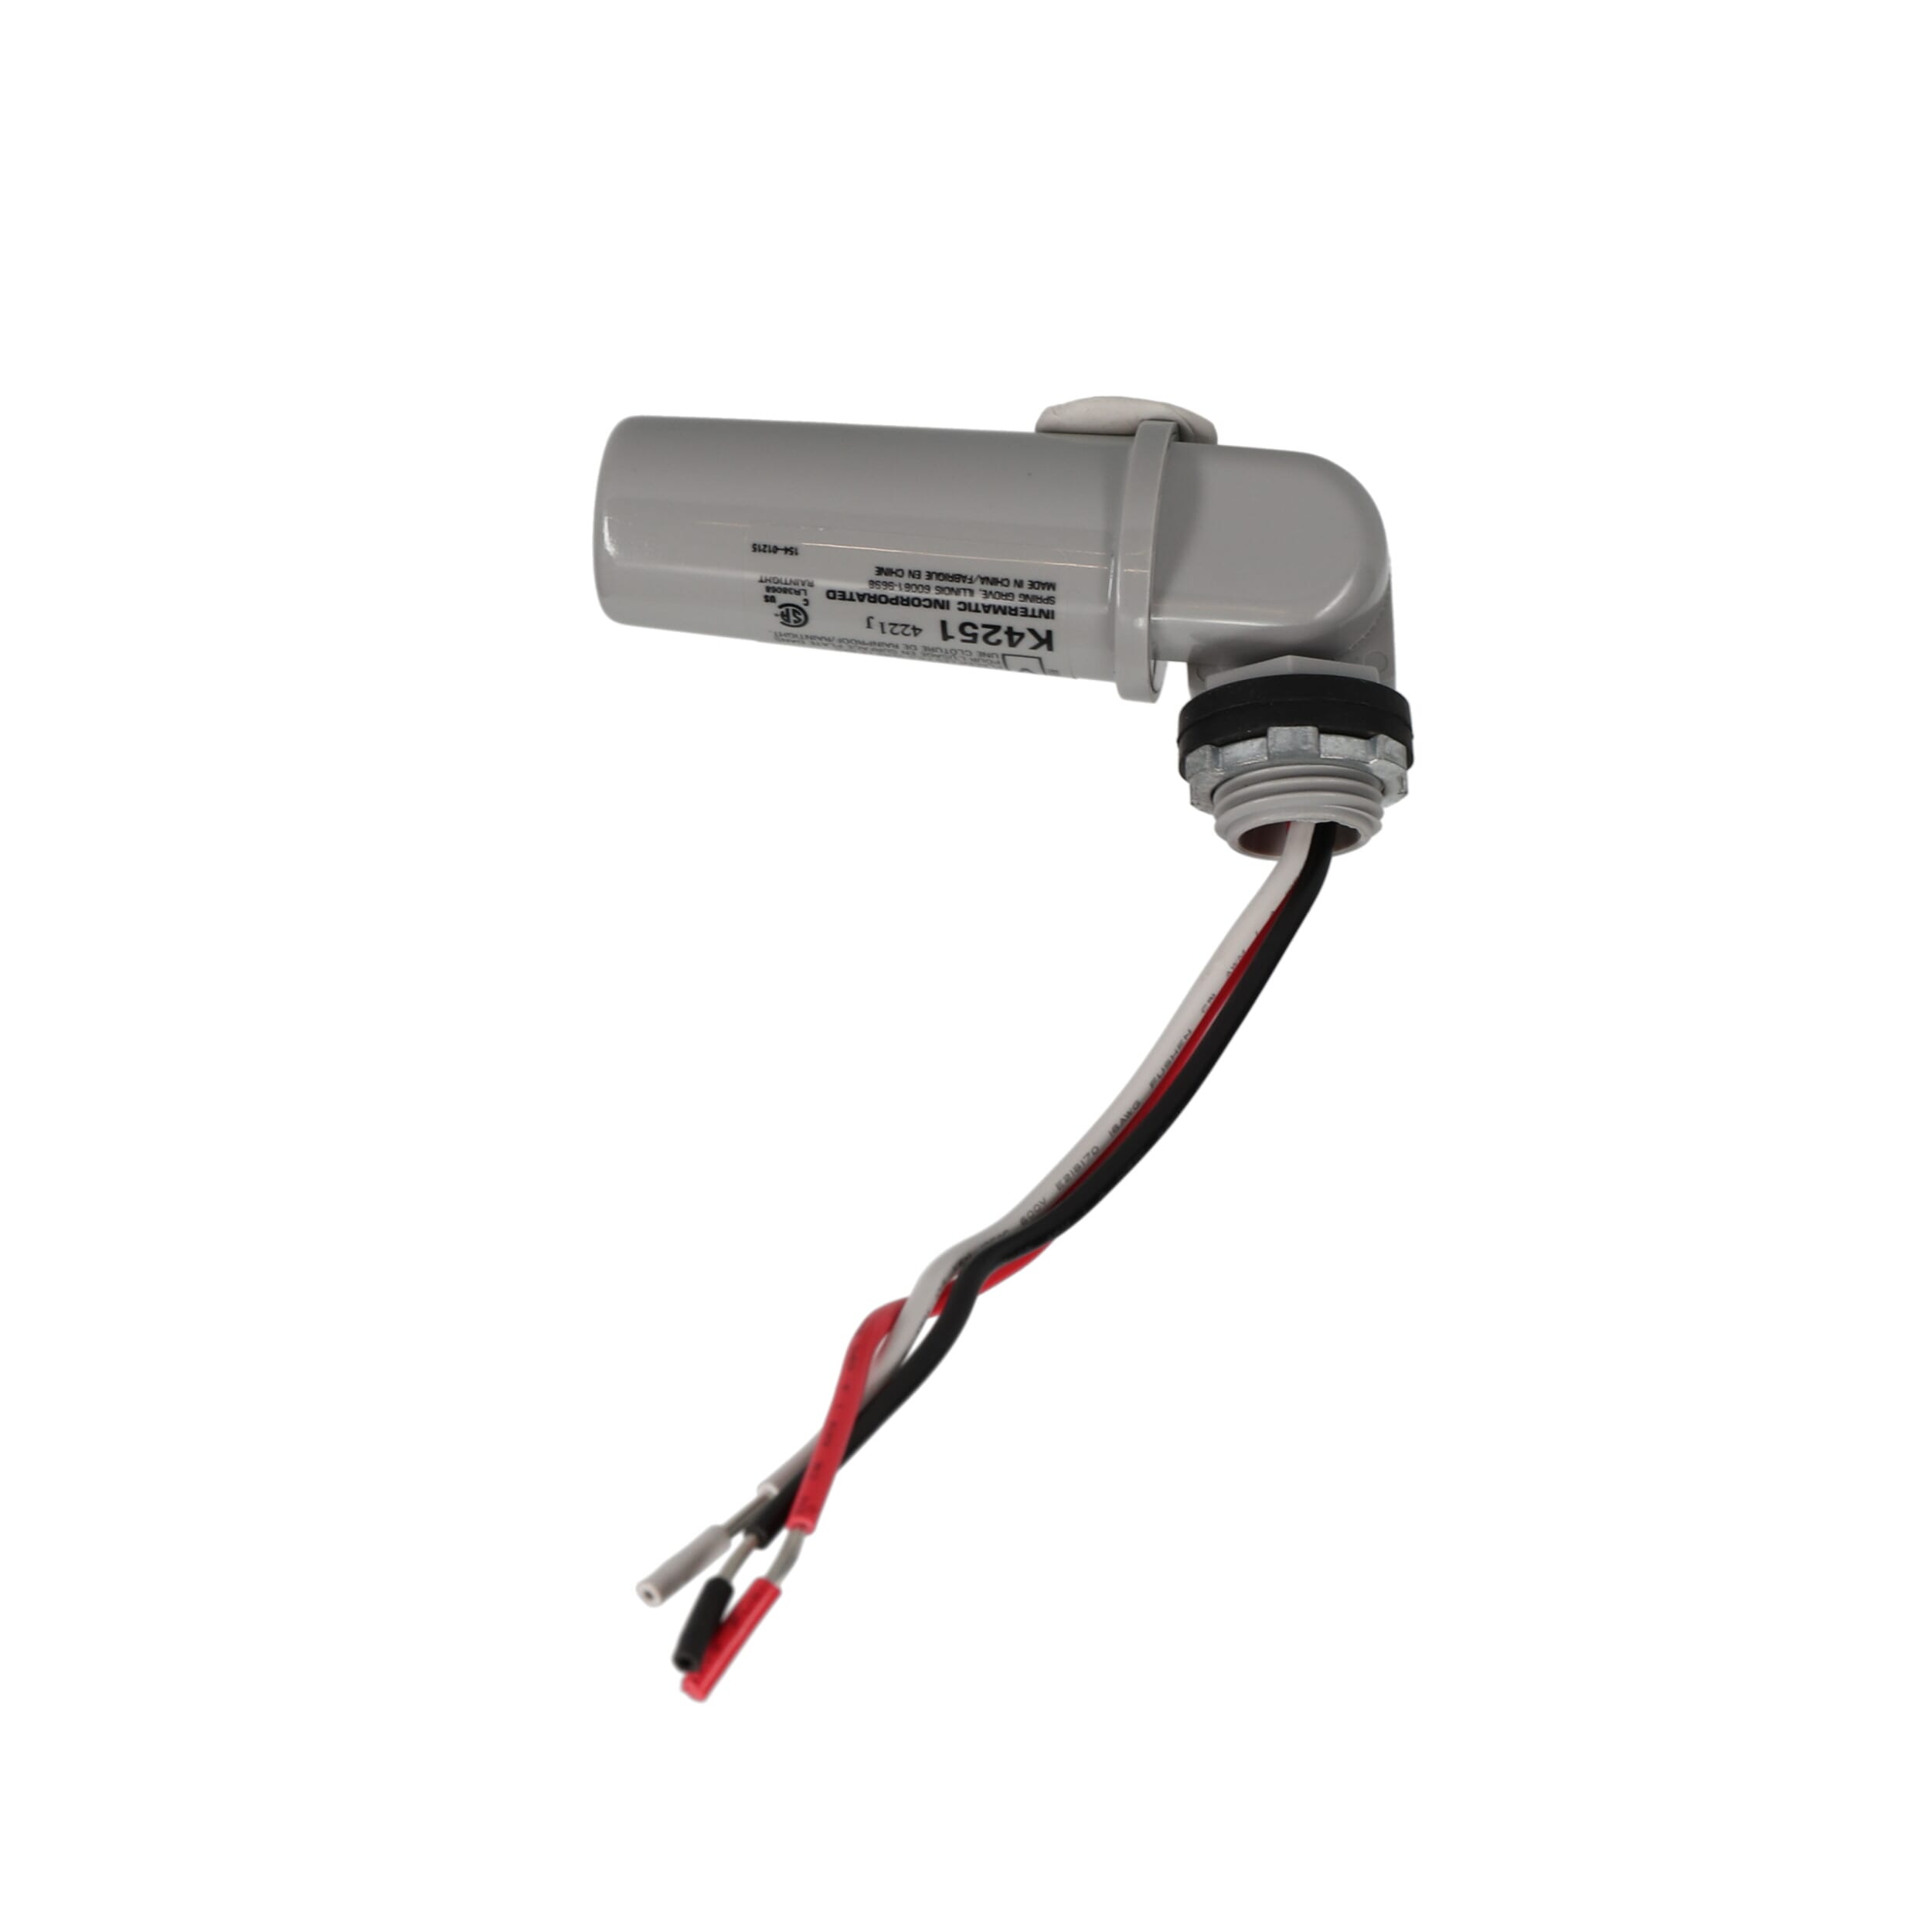 Intermatic K4251 120-volt Photocontrols With Stem and Swivel Mounting for sale online 